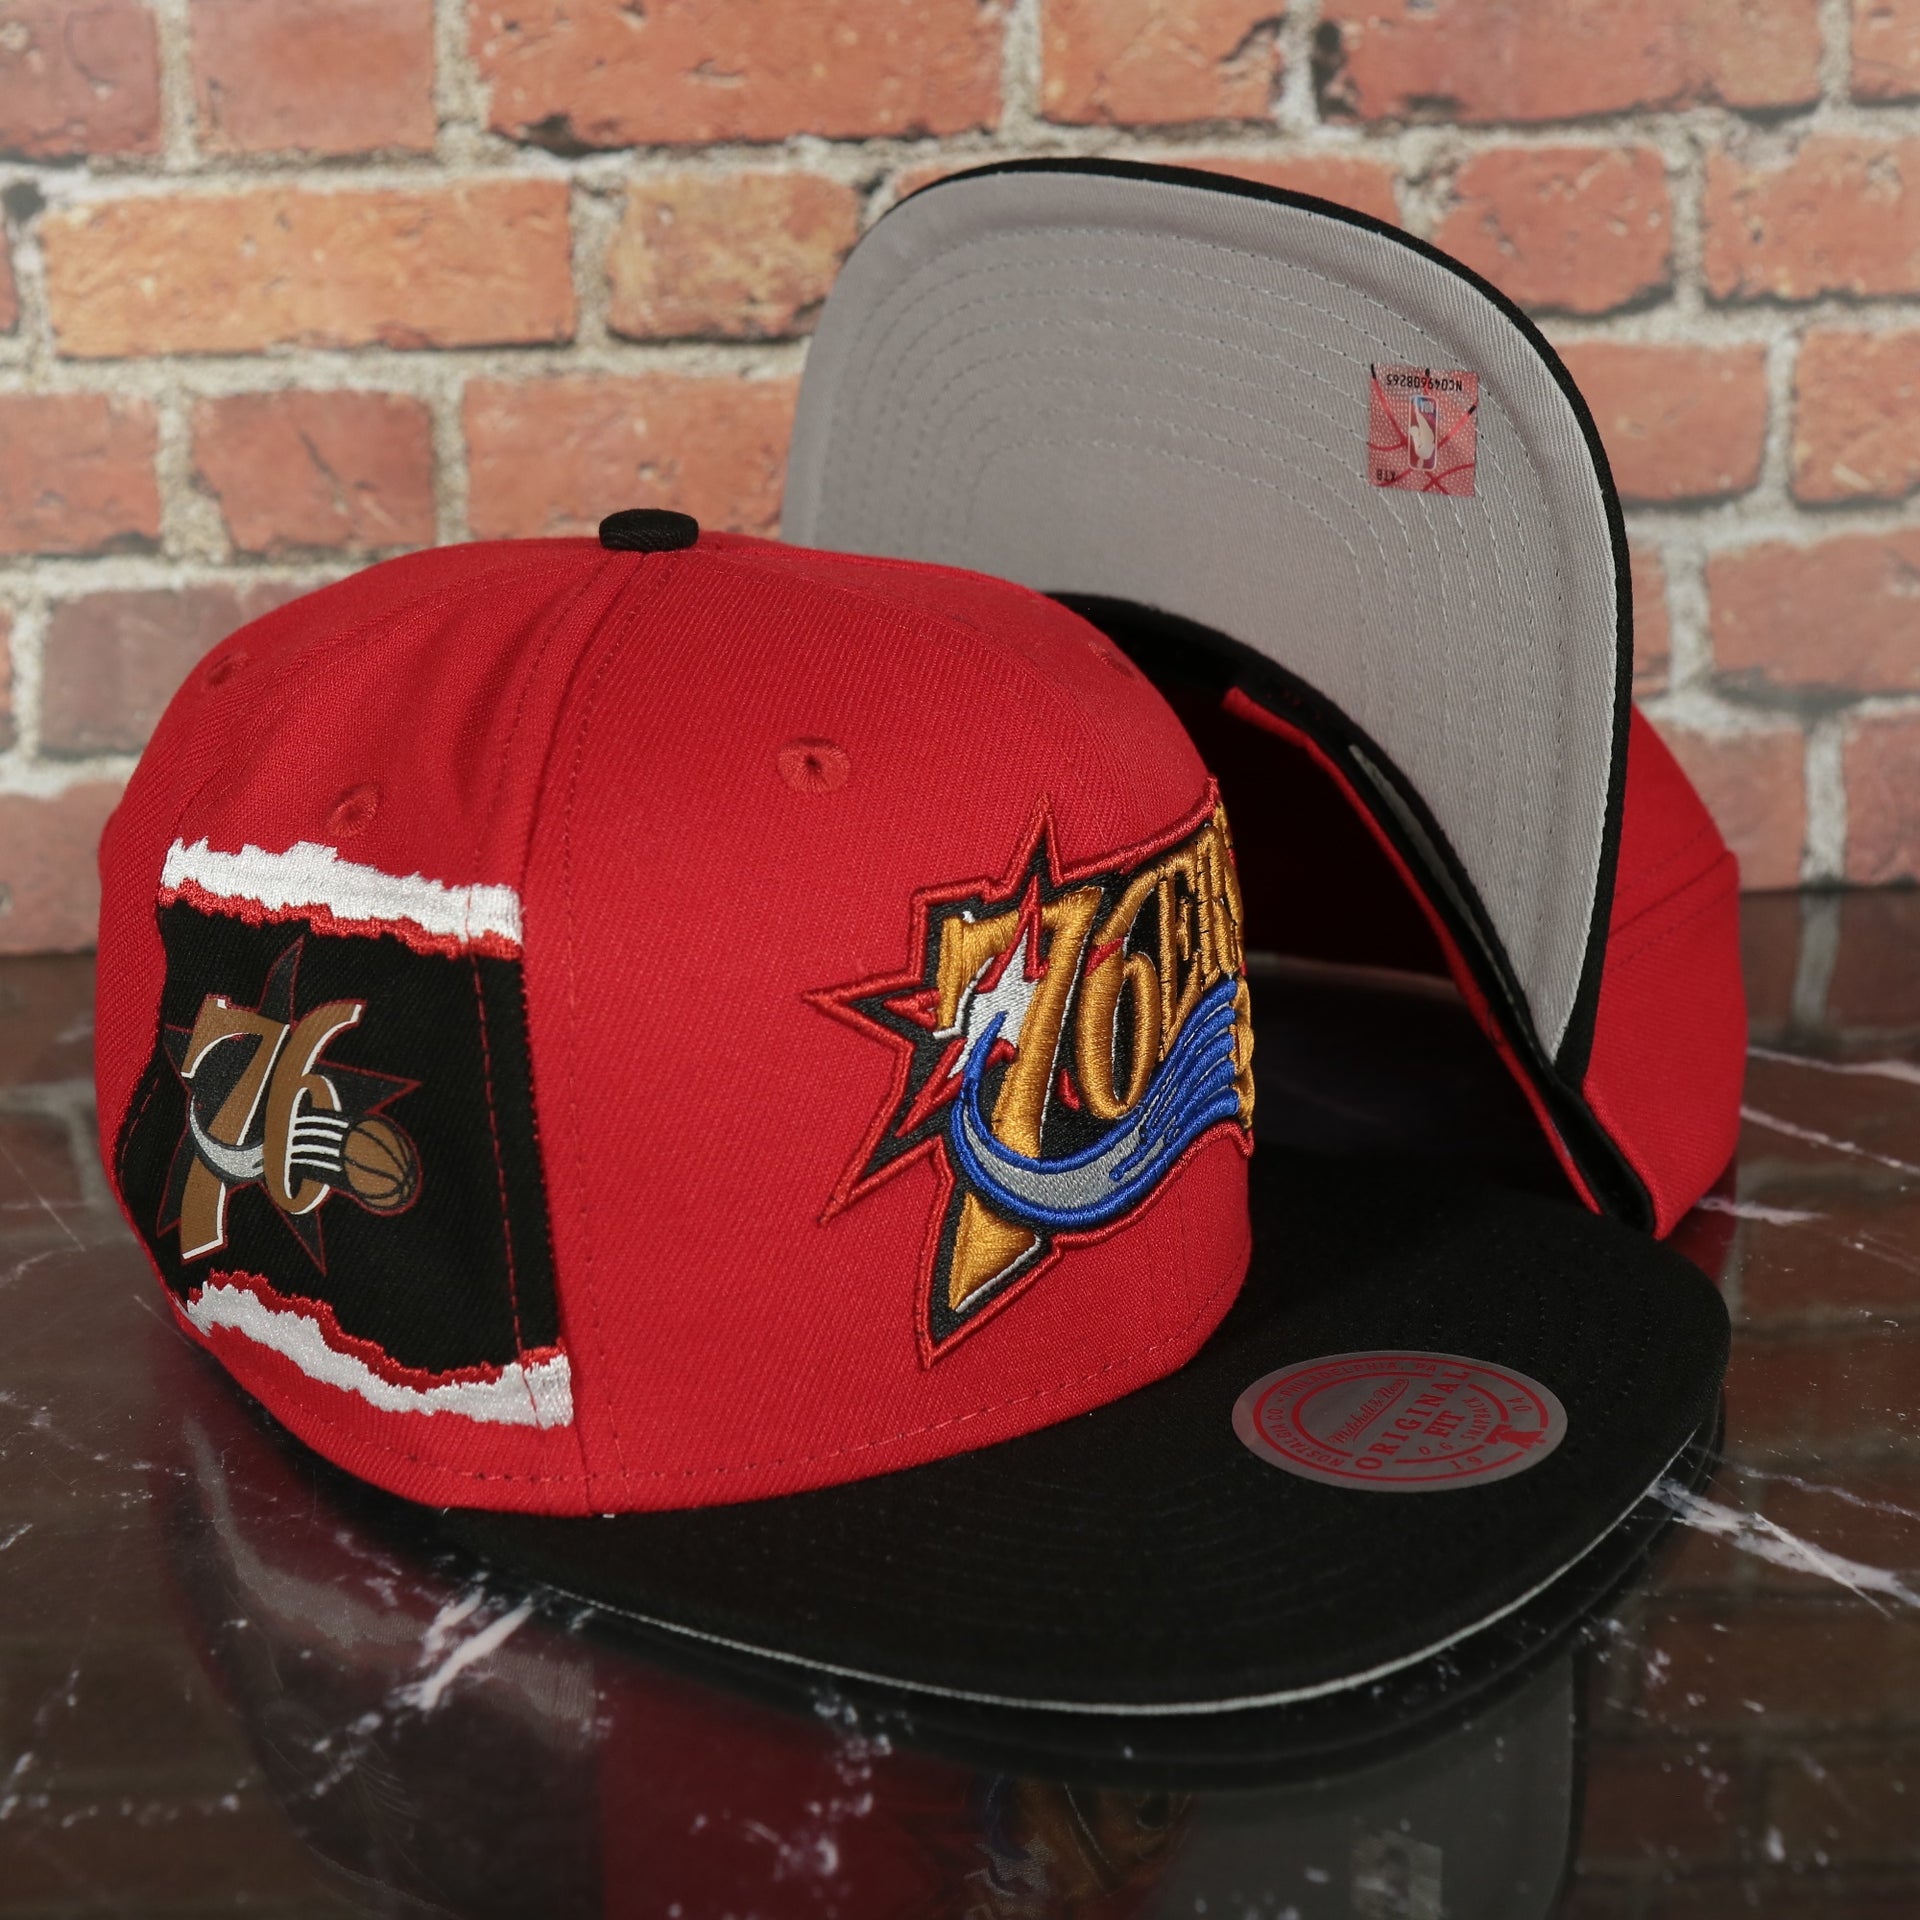 Philadelphia 76ers Hardwood Classics Jumbotron "76ers" Ripped Wordmark side patch Grey Bottom Red/Black Snapback hat | Mitchell and Ness Two Tone Snap Cap